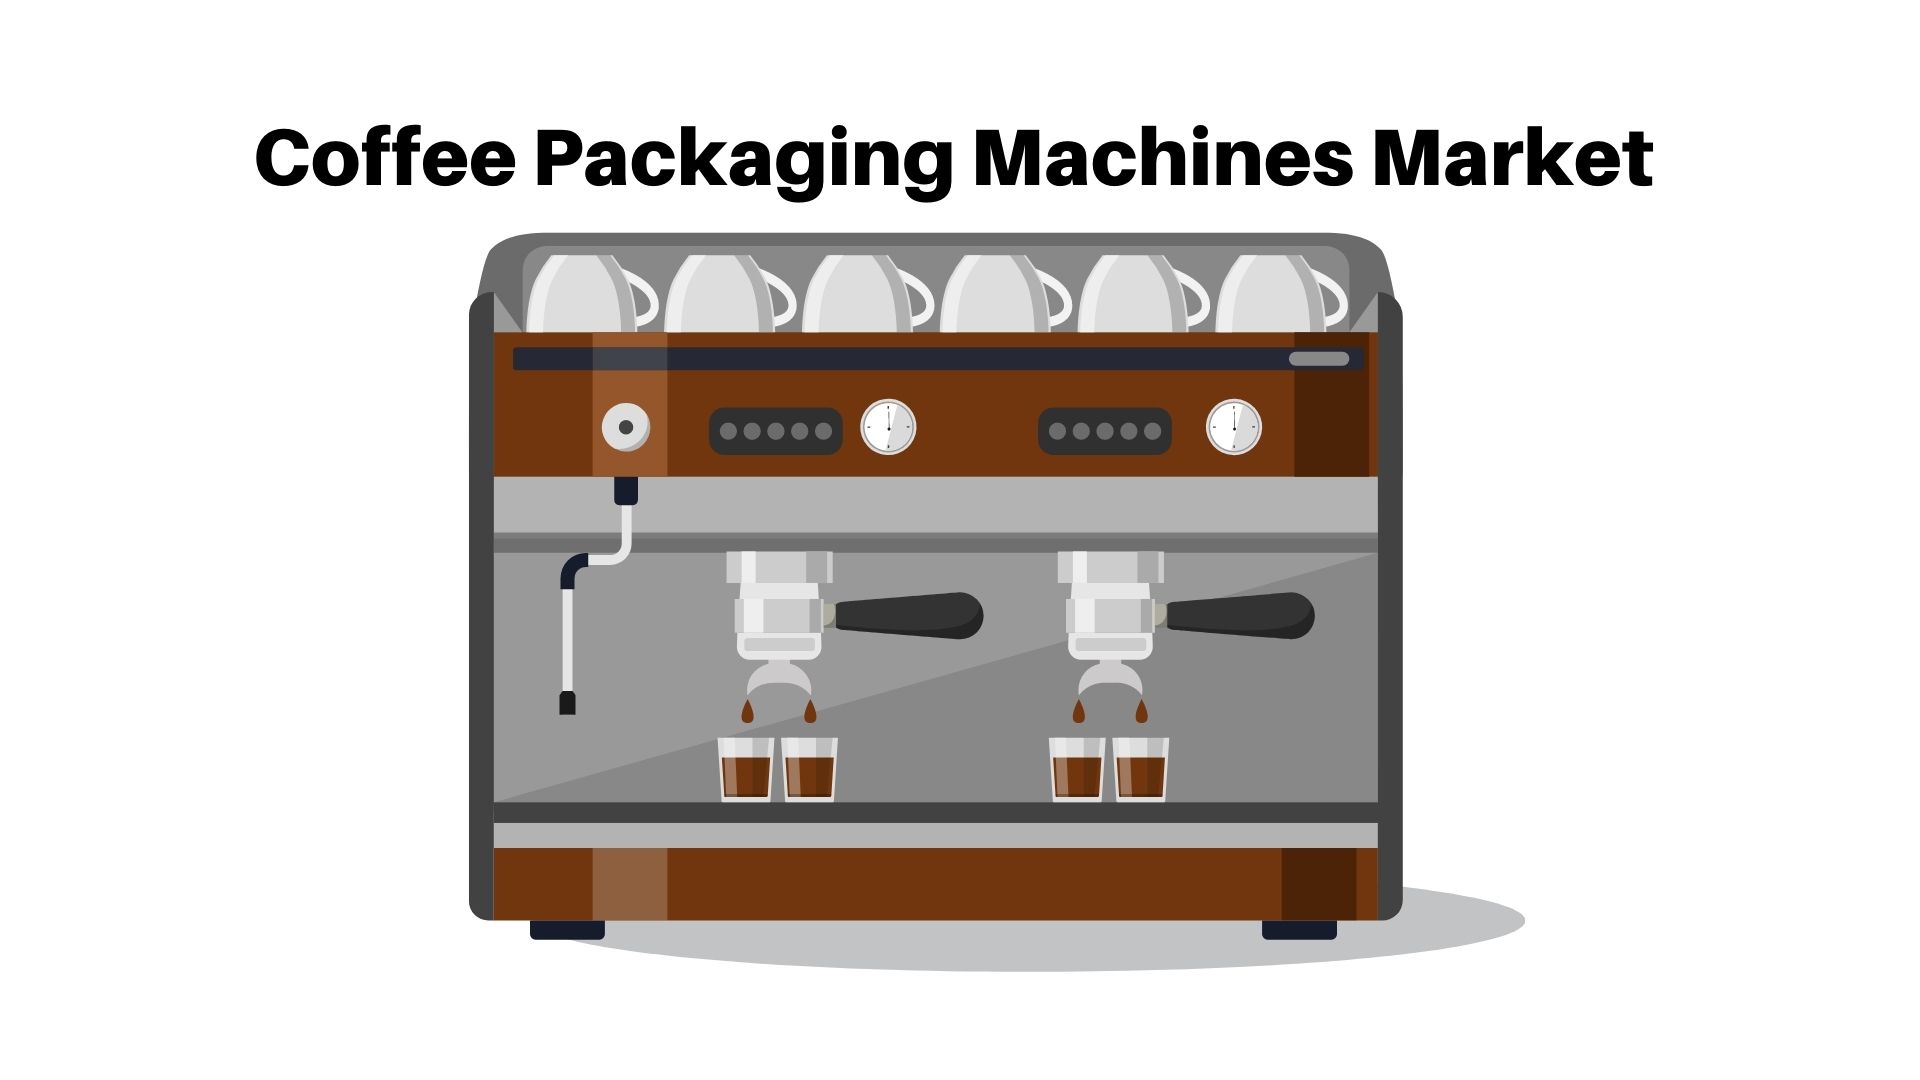 Coffee Packaging Machines Market Size is expected to reach USD 648.92 million by 2032